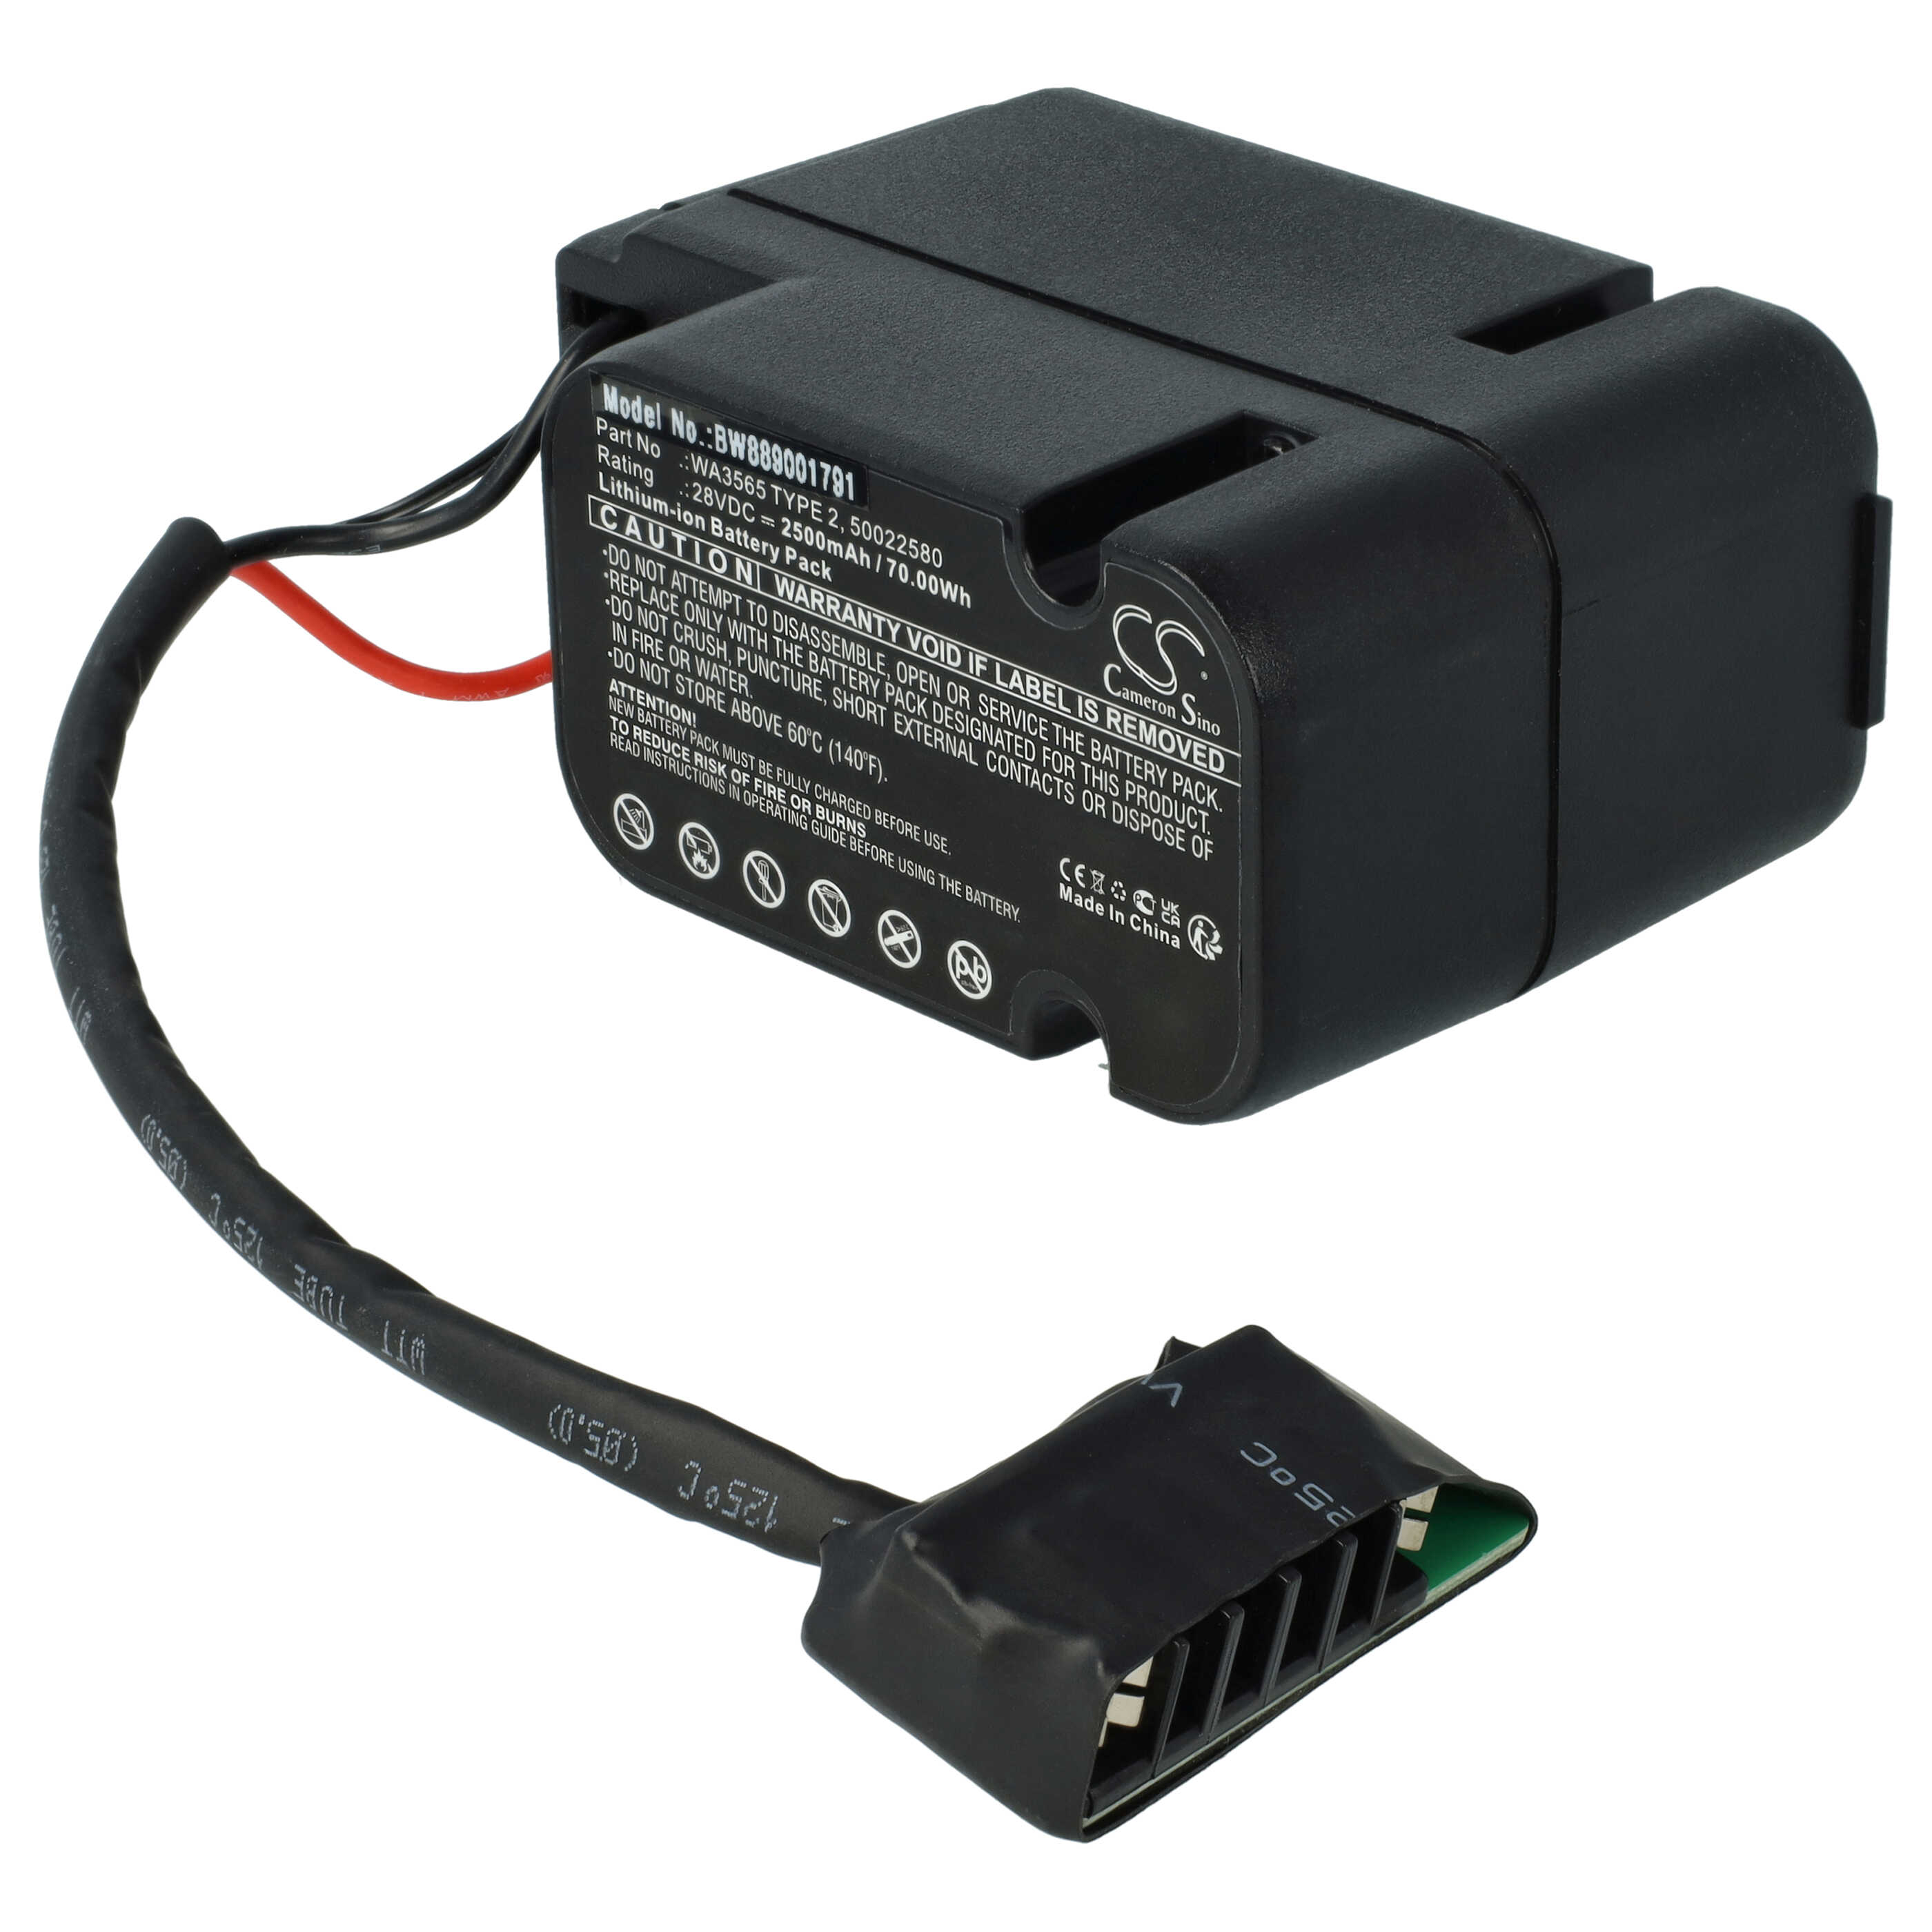 Lawnmower Battery Replacement for Worx 50022580, 50029621, 50026980, 50022713 - 2500mAh 28V Li-Ion, black